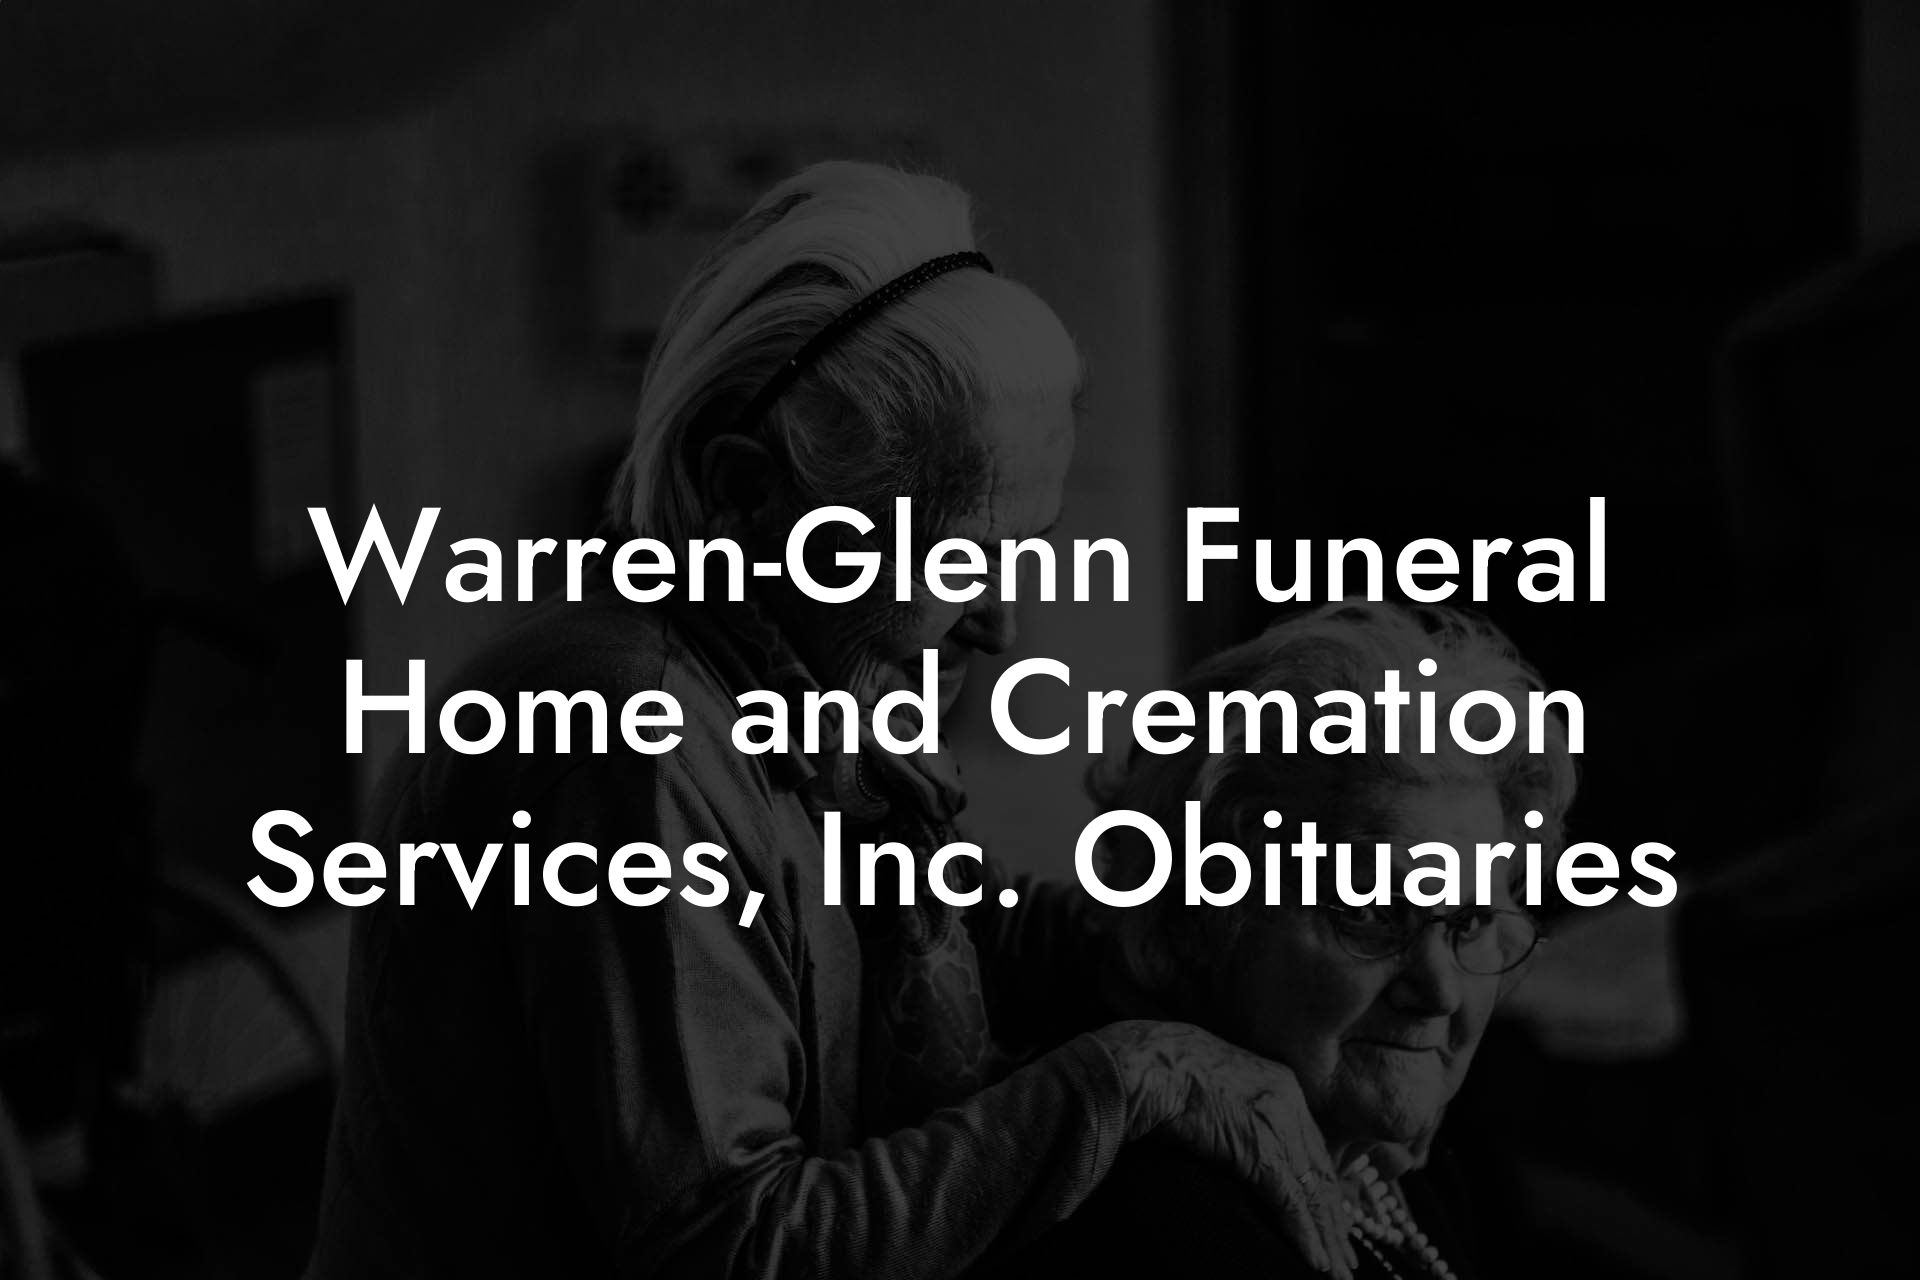 Warren-Glenn Funeral Home and Cremation Services, Inc. Obituaries